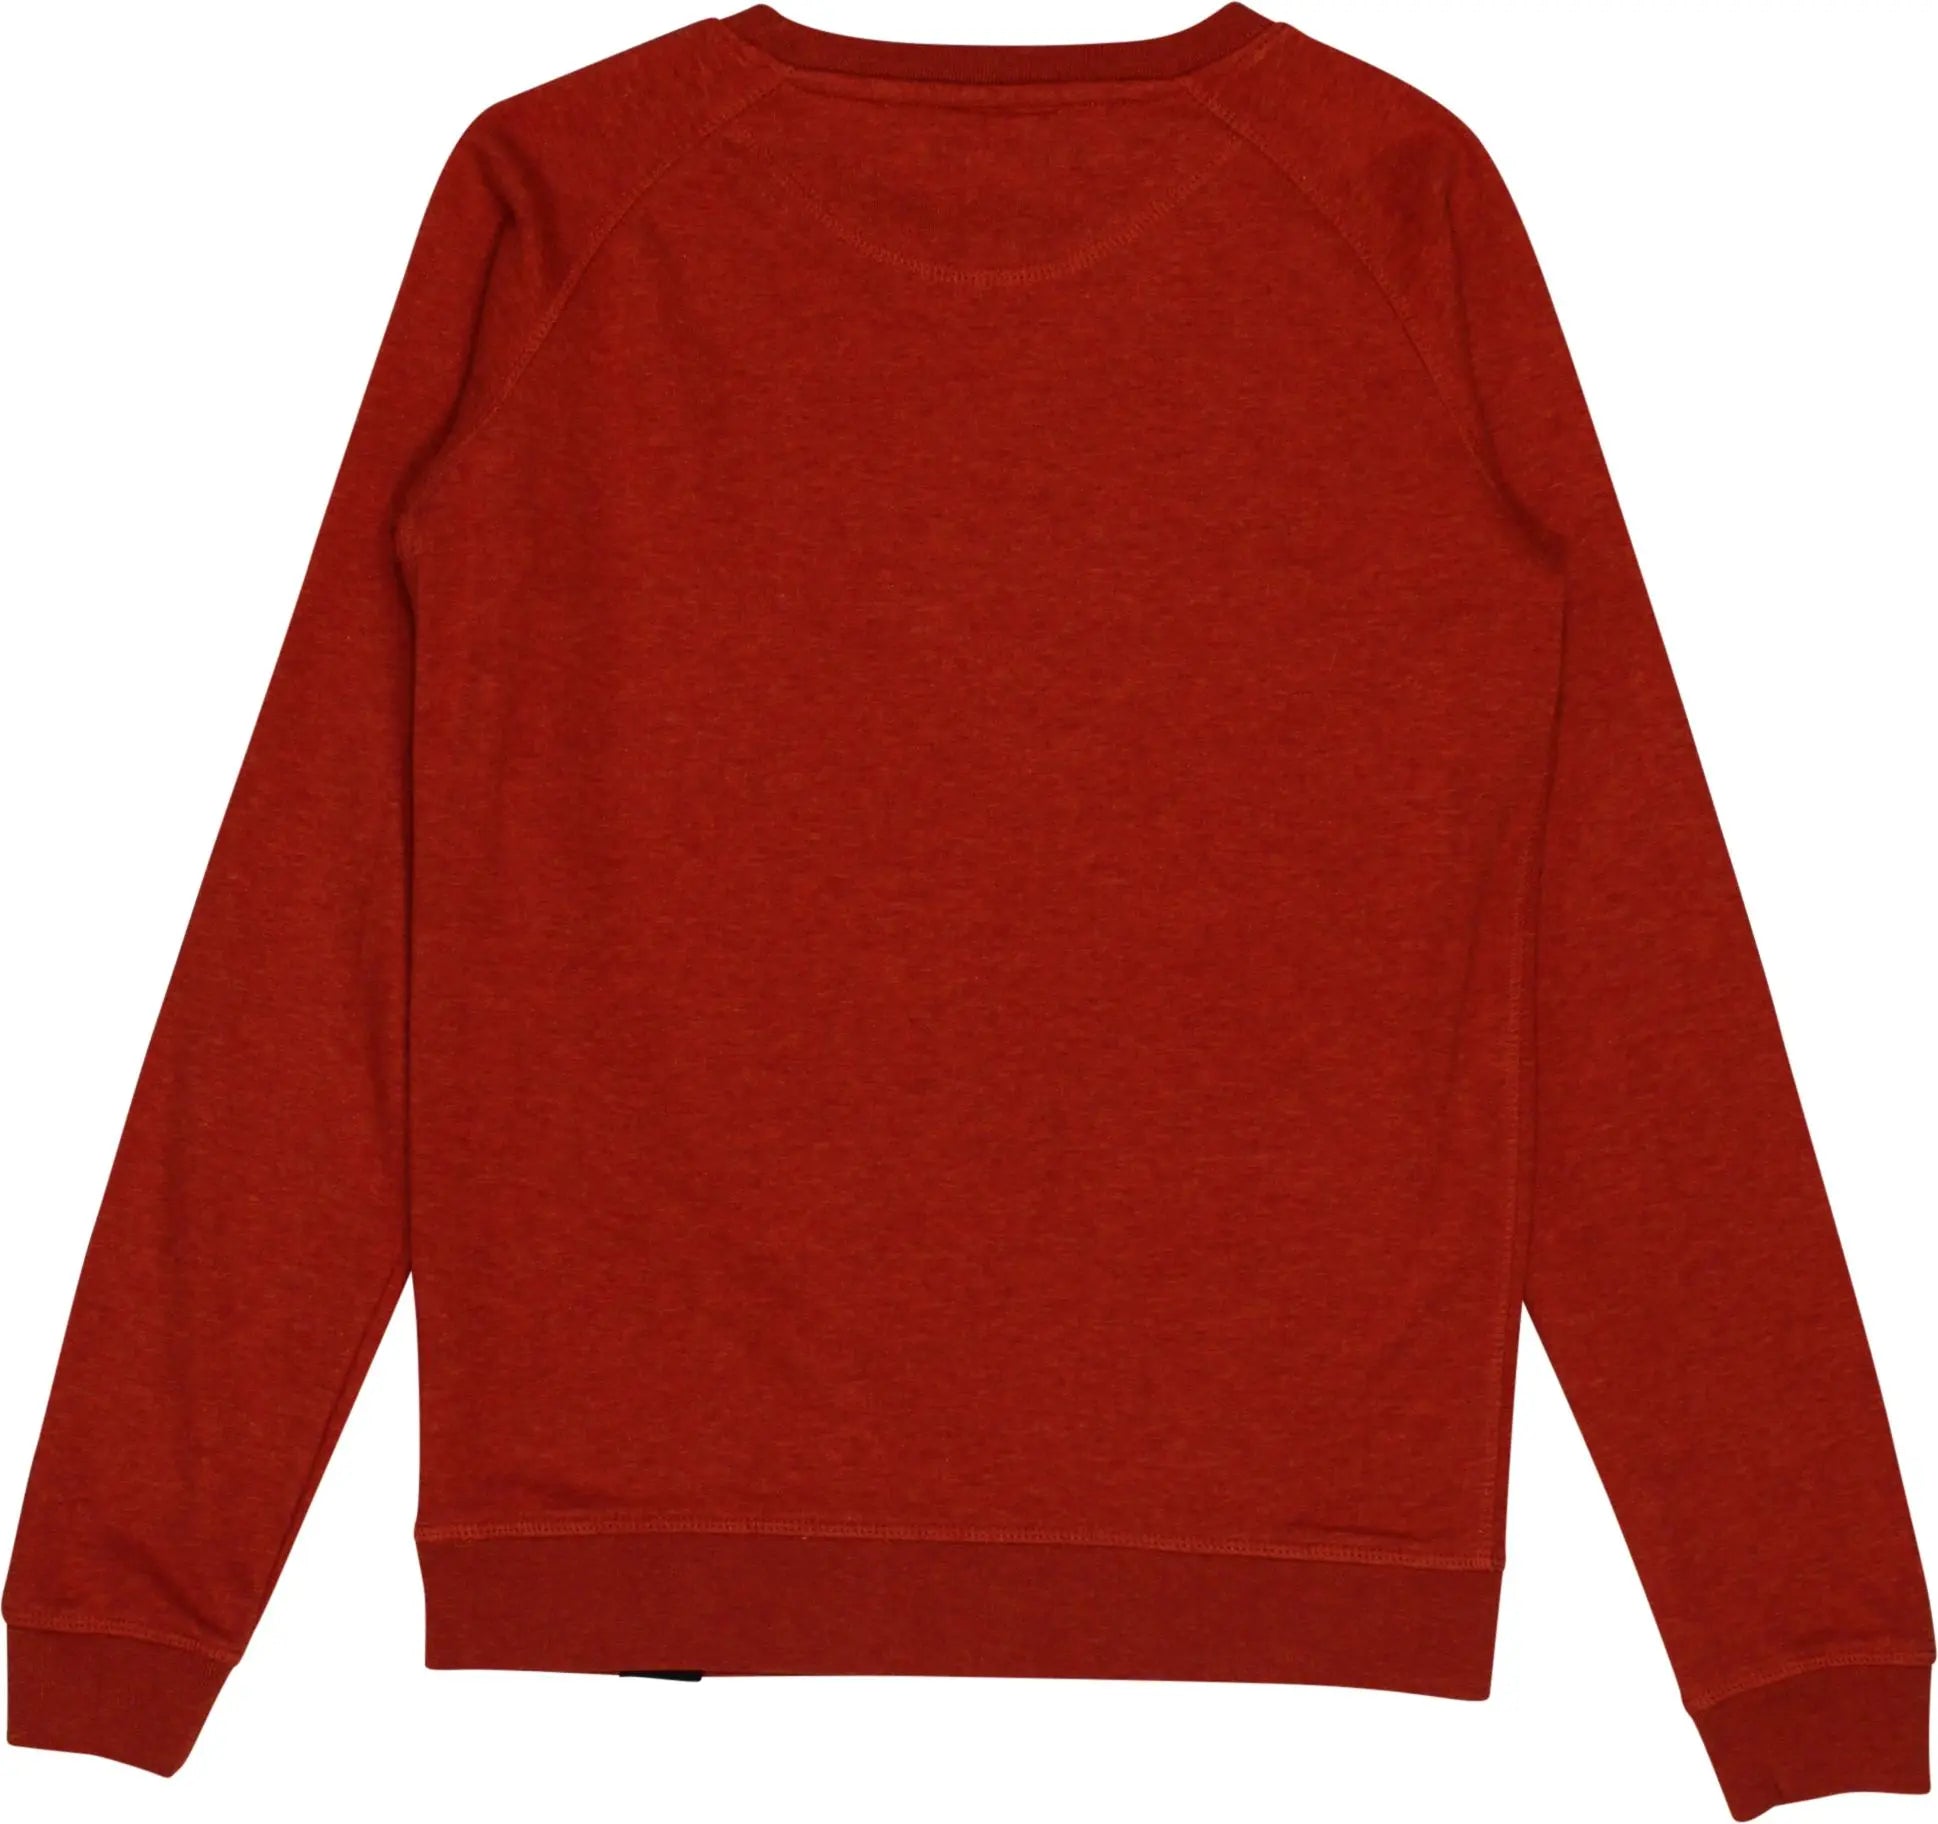 Rumag - Plain Sweater- ThriftTale.com - Vintage and second handclothing